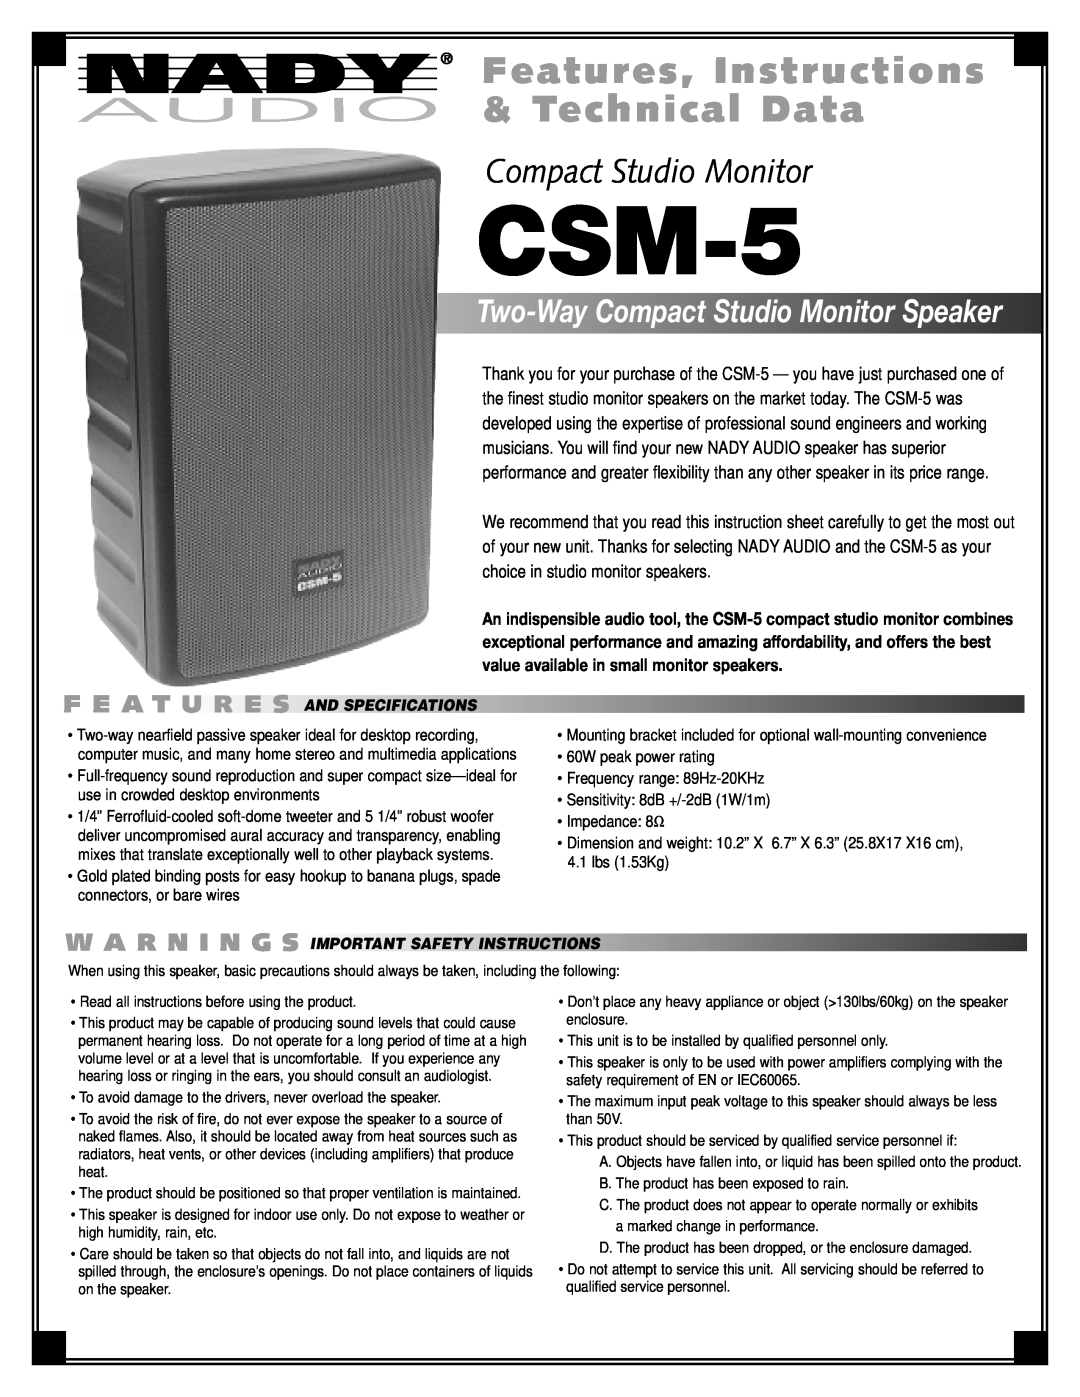 Nady Systems CSM-5 instruction sheet F E A T Ures, And Specifications, Wa R N I N G Simportantsafetyinstructions 